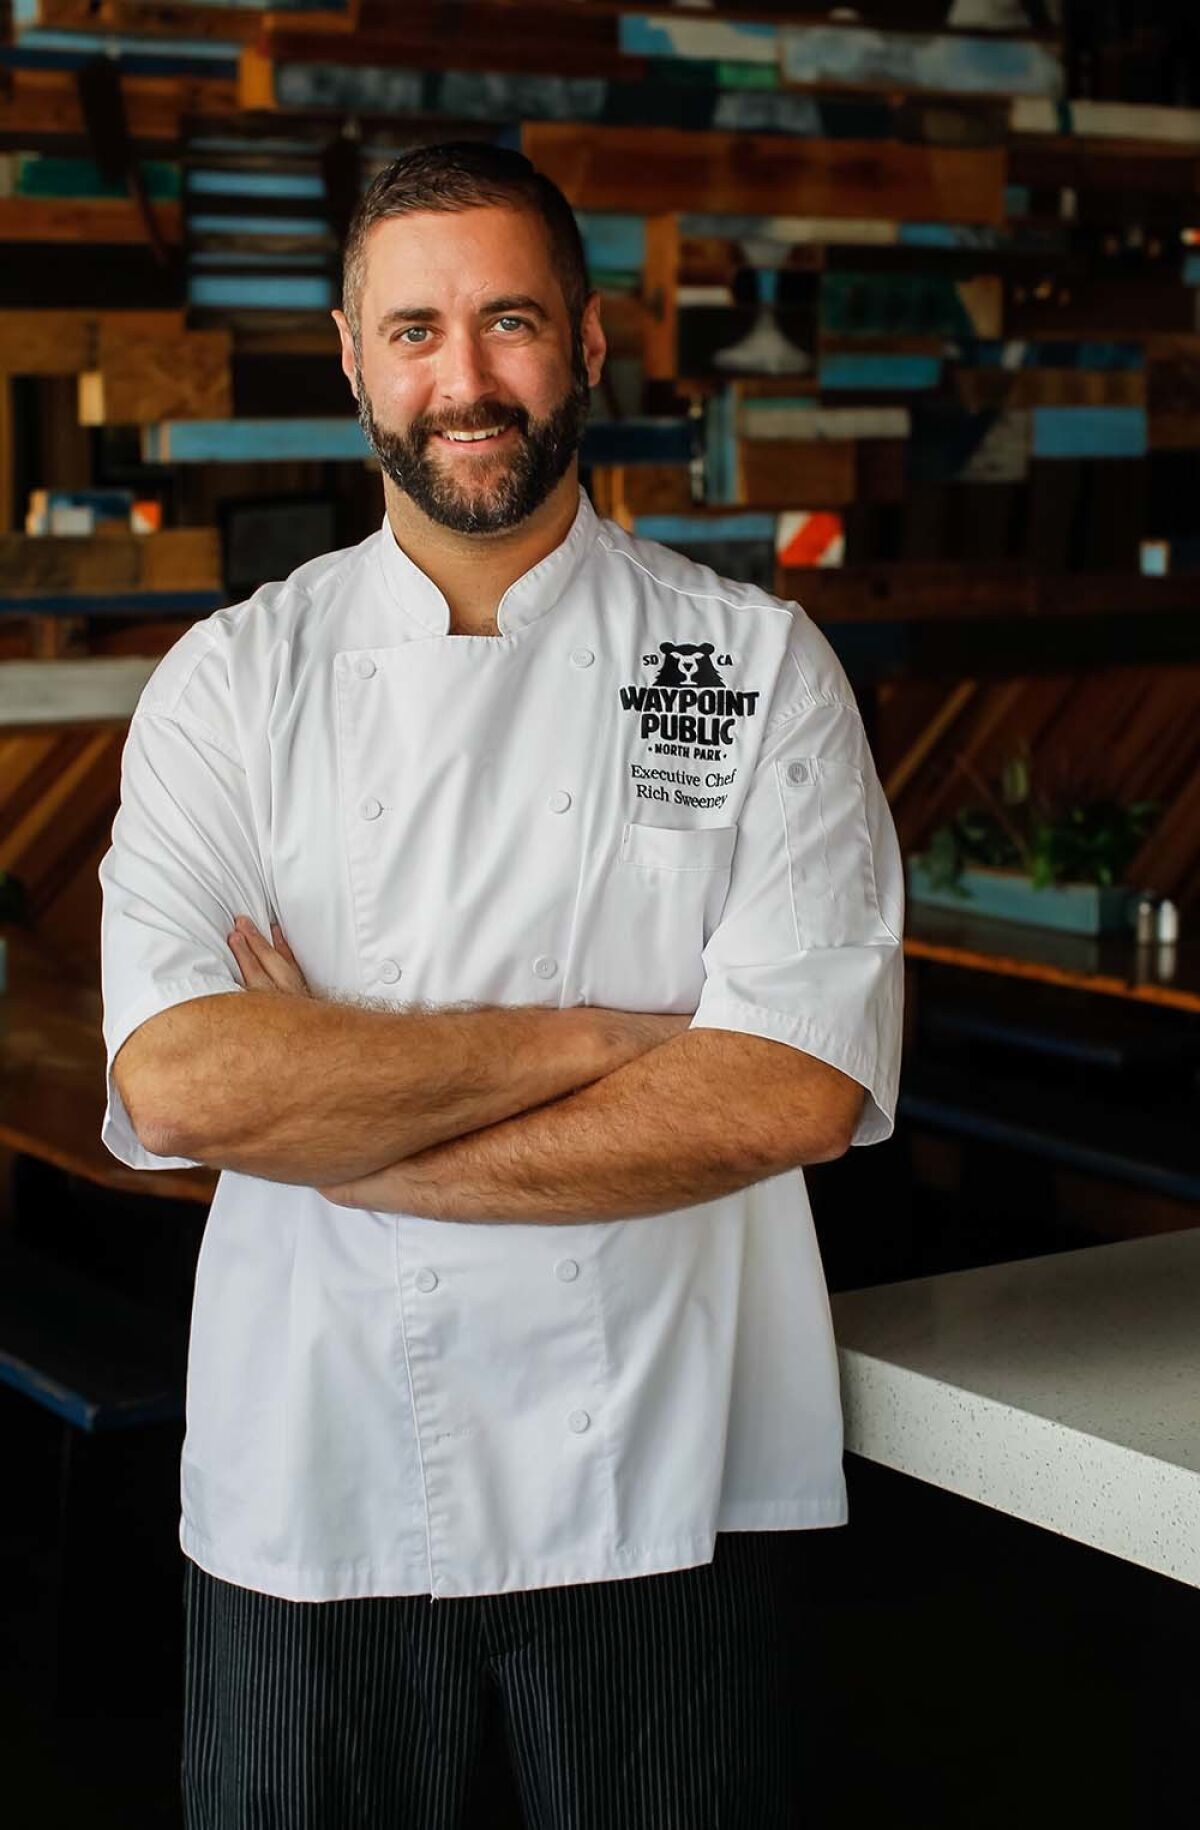 Waypoint Public Executive Chef Rich Sweeney.